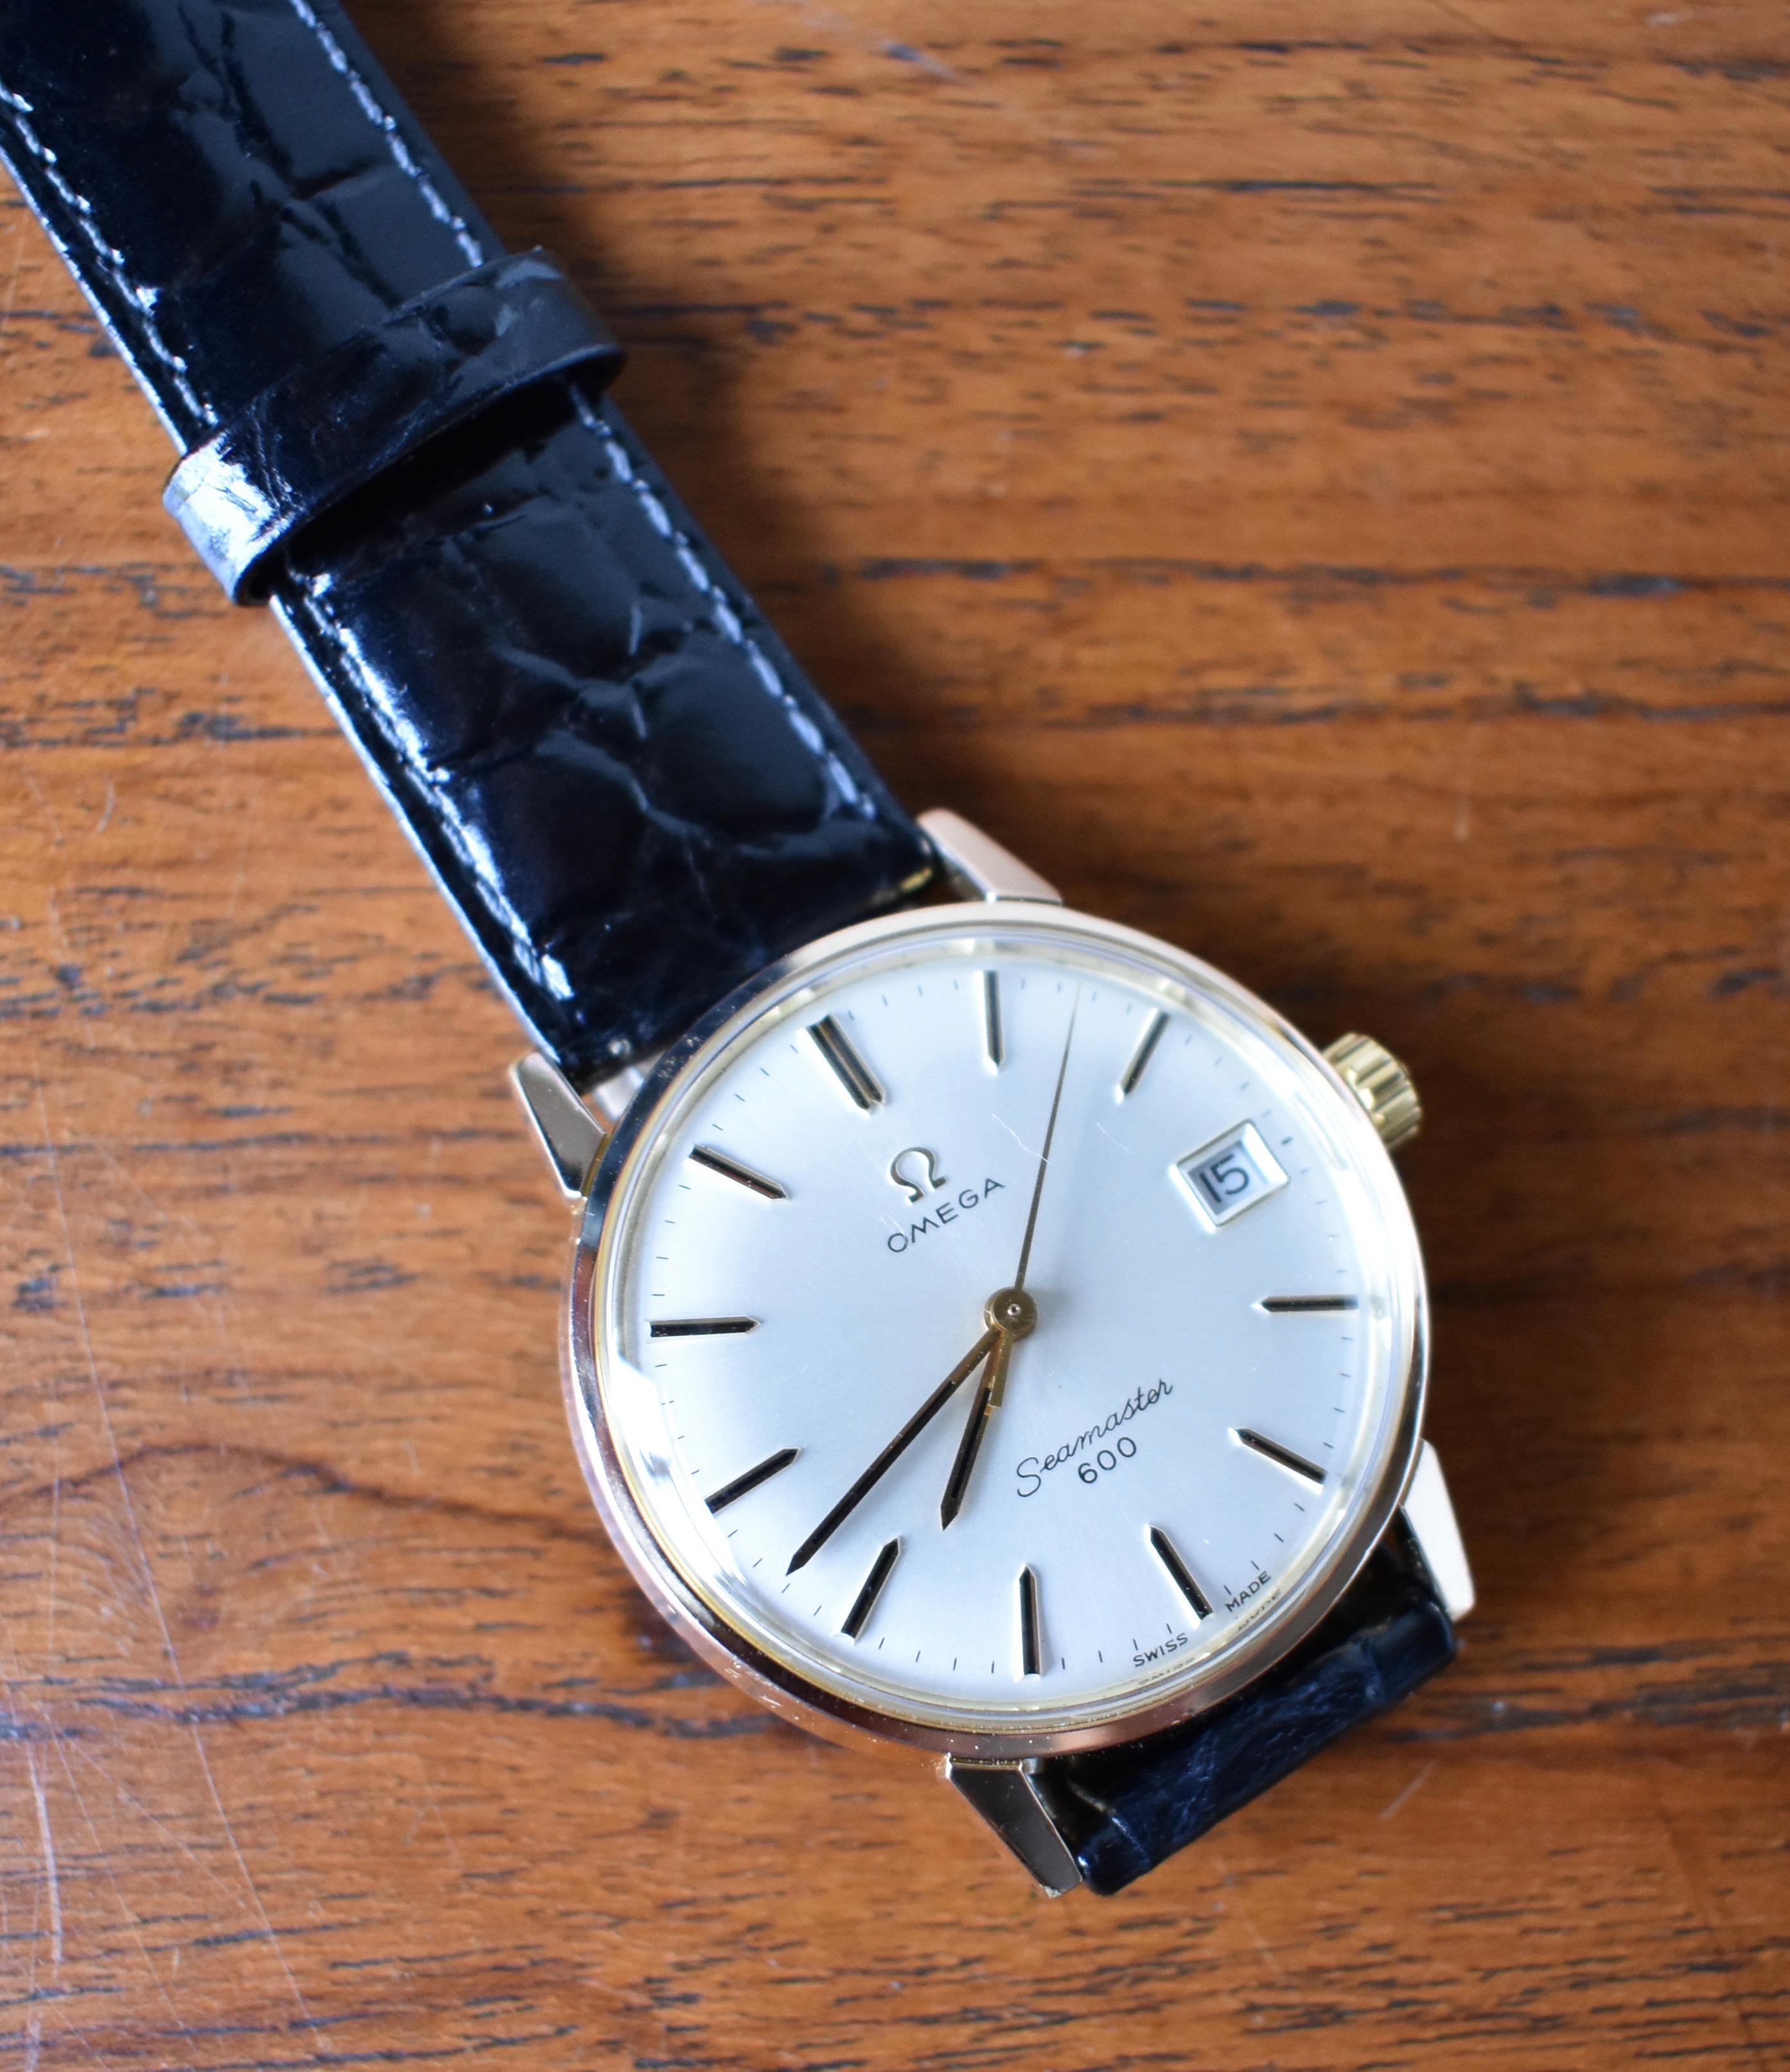 Omega seamaster 600.
Gold on steel.
Swiss made.